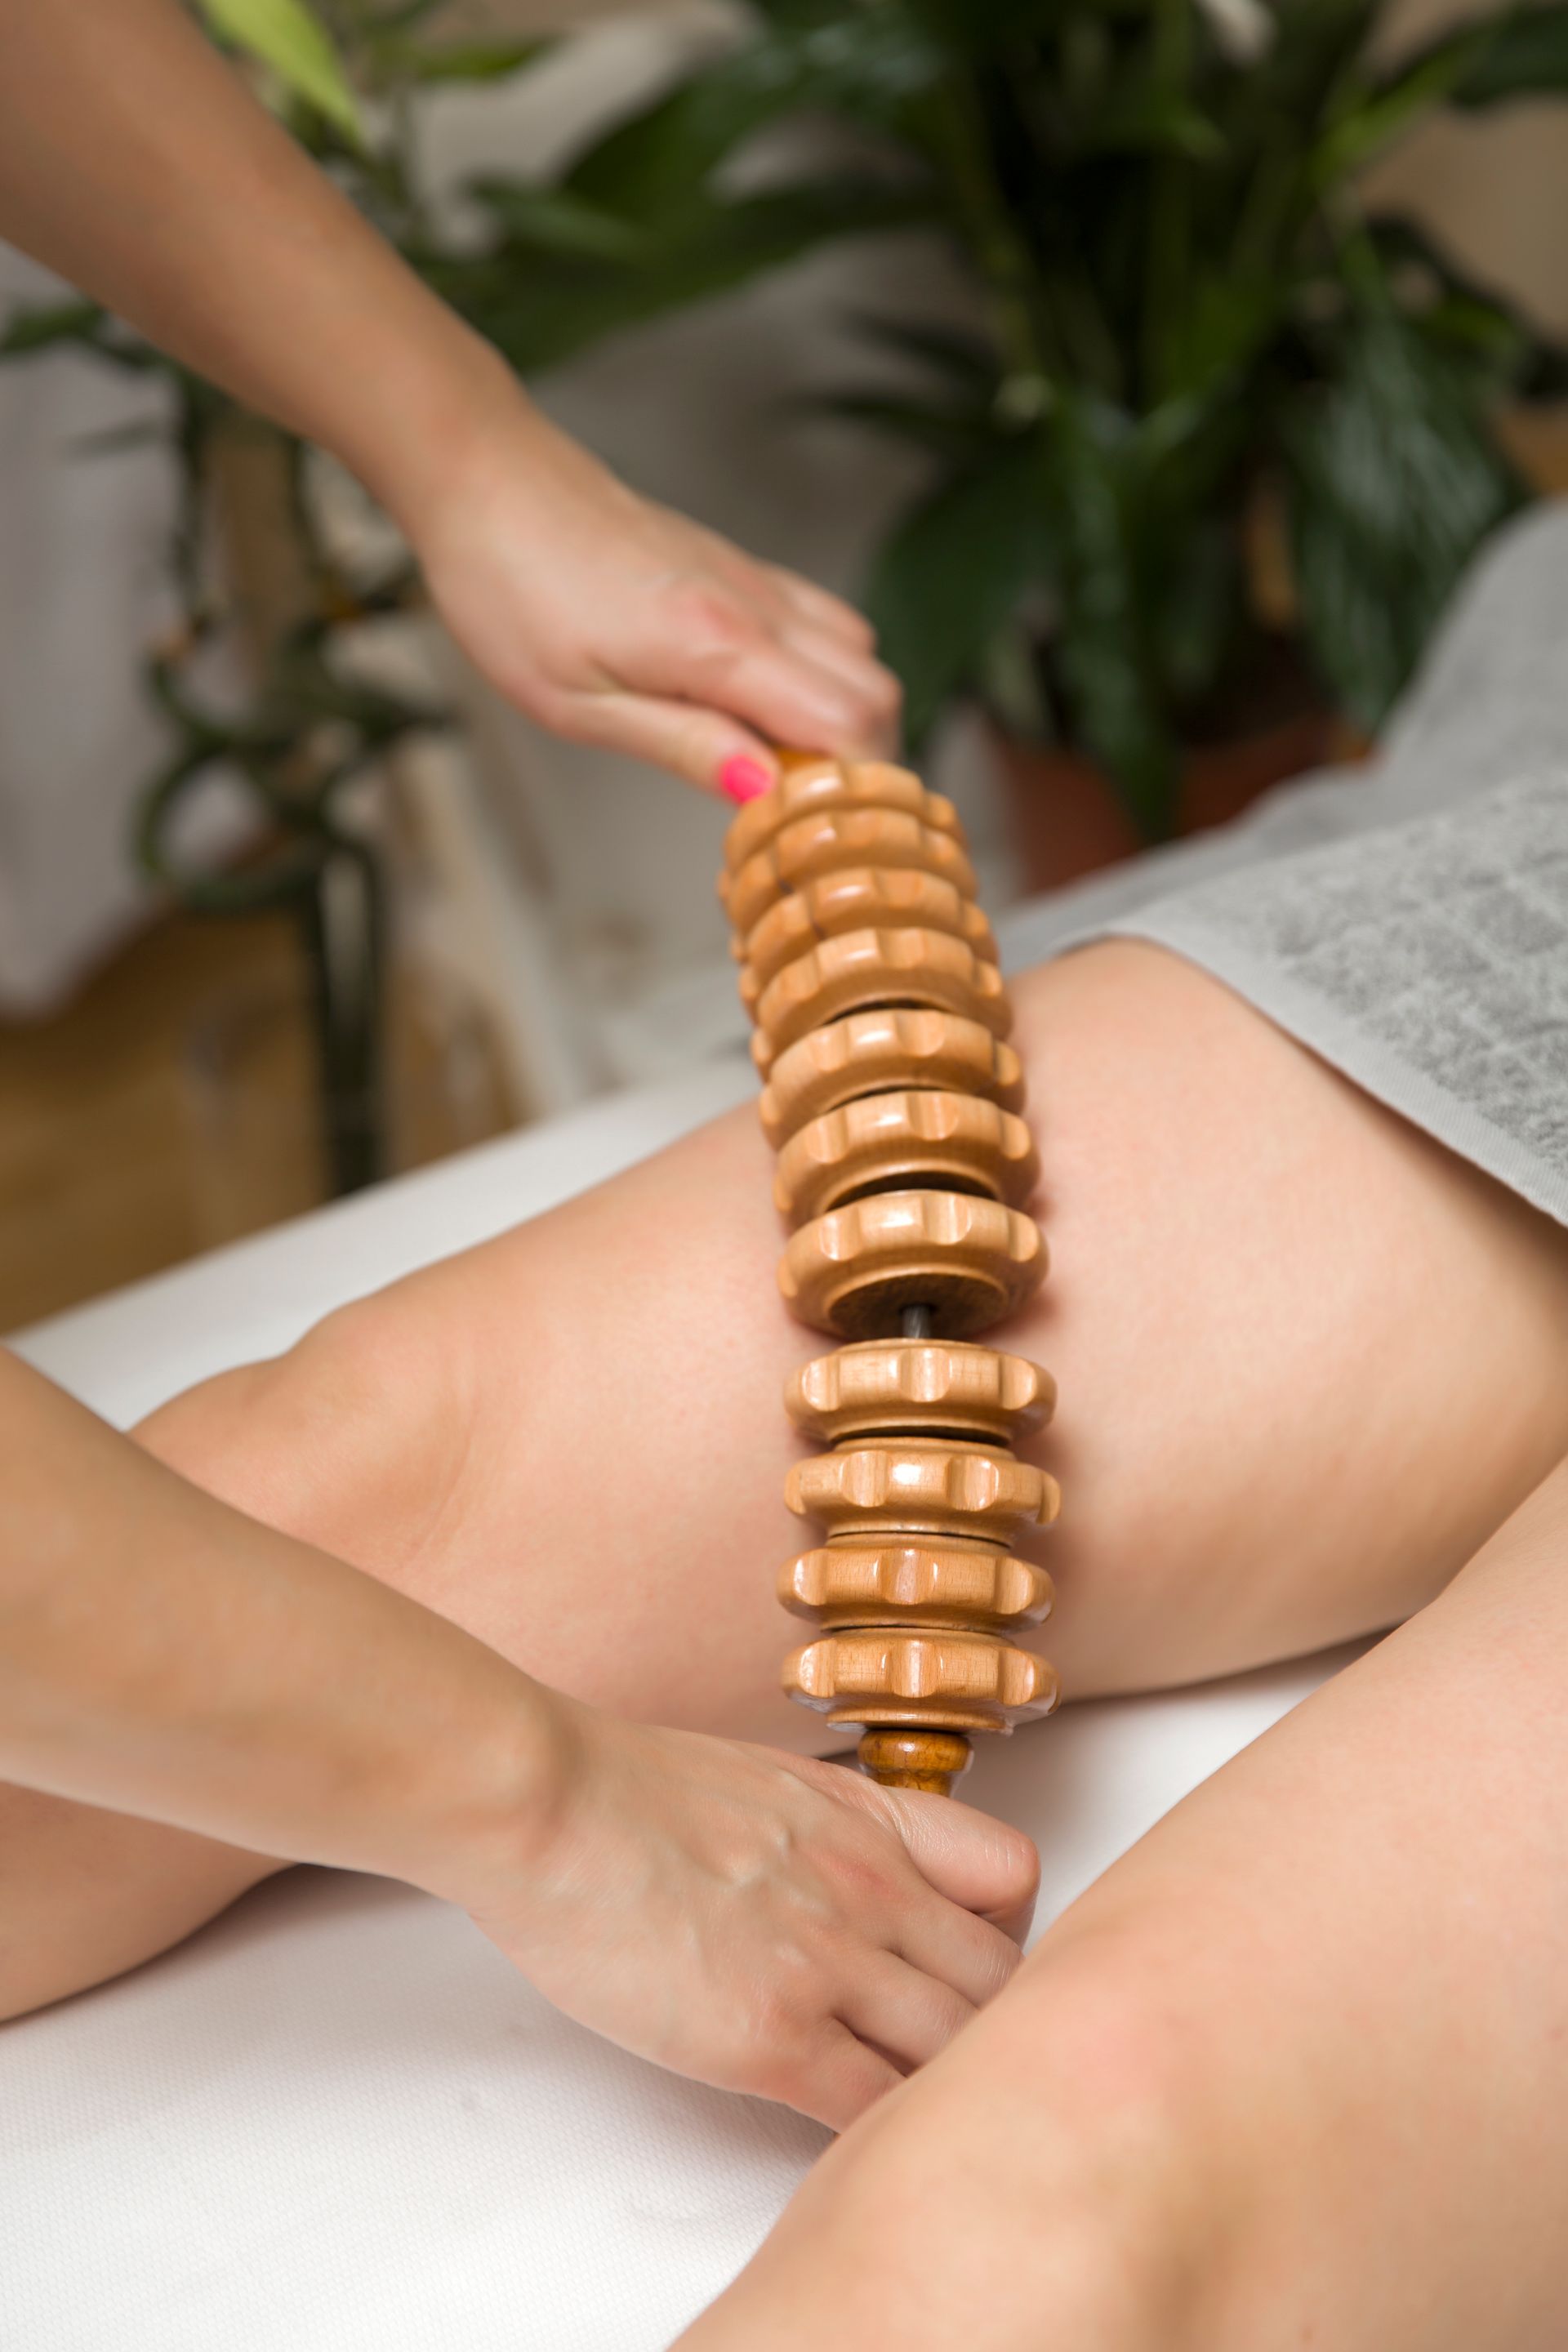 a woman is getting a wooden massage on her leg .